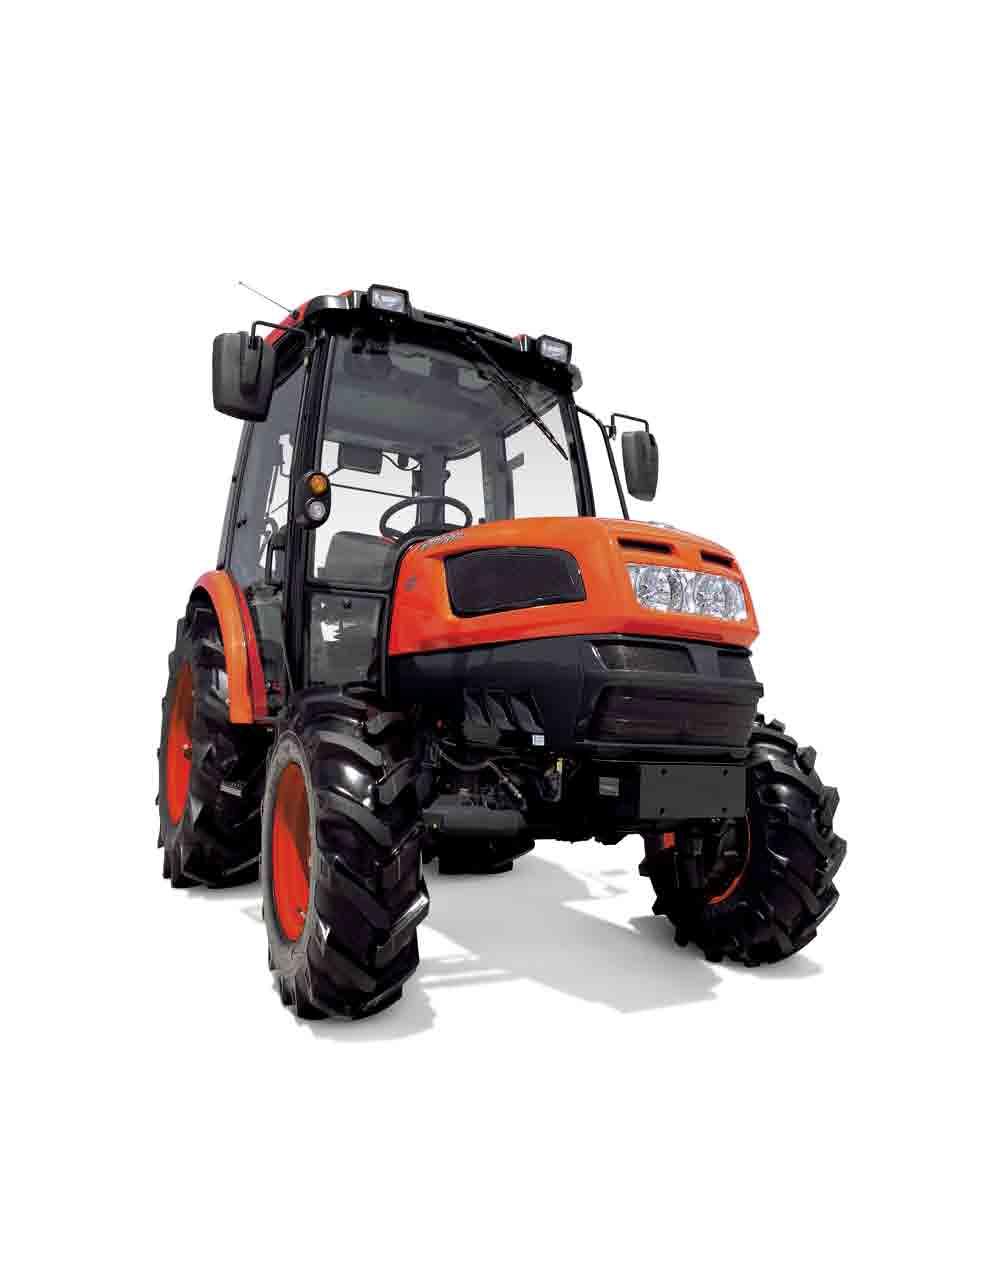 KIOTI Utility Tractor It all happens by design The newly designed hood and fender add distinctive lines to the DKSE Series tractors.